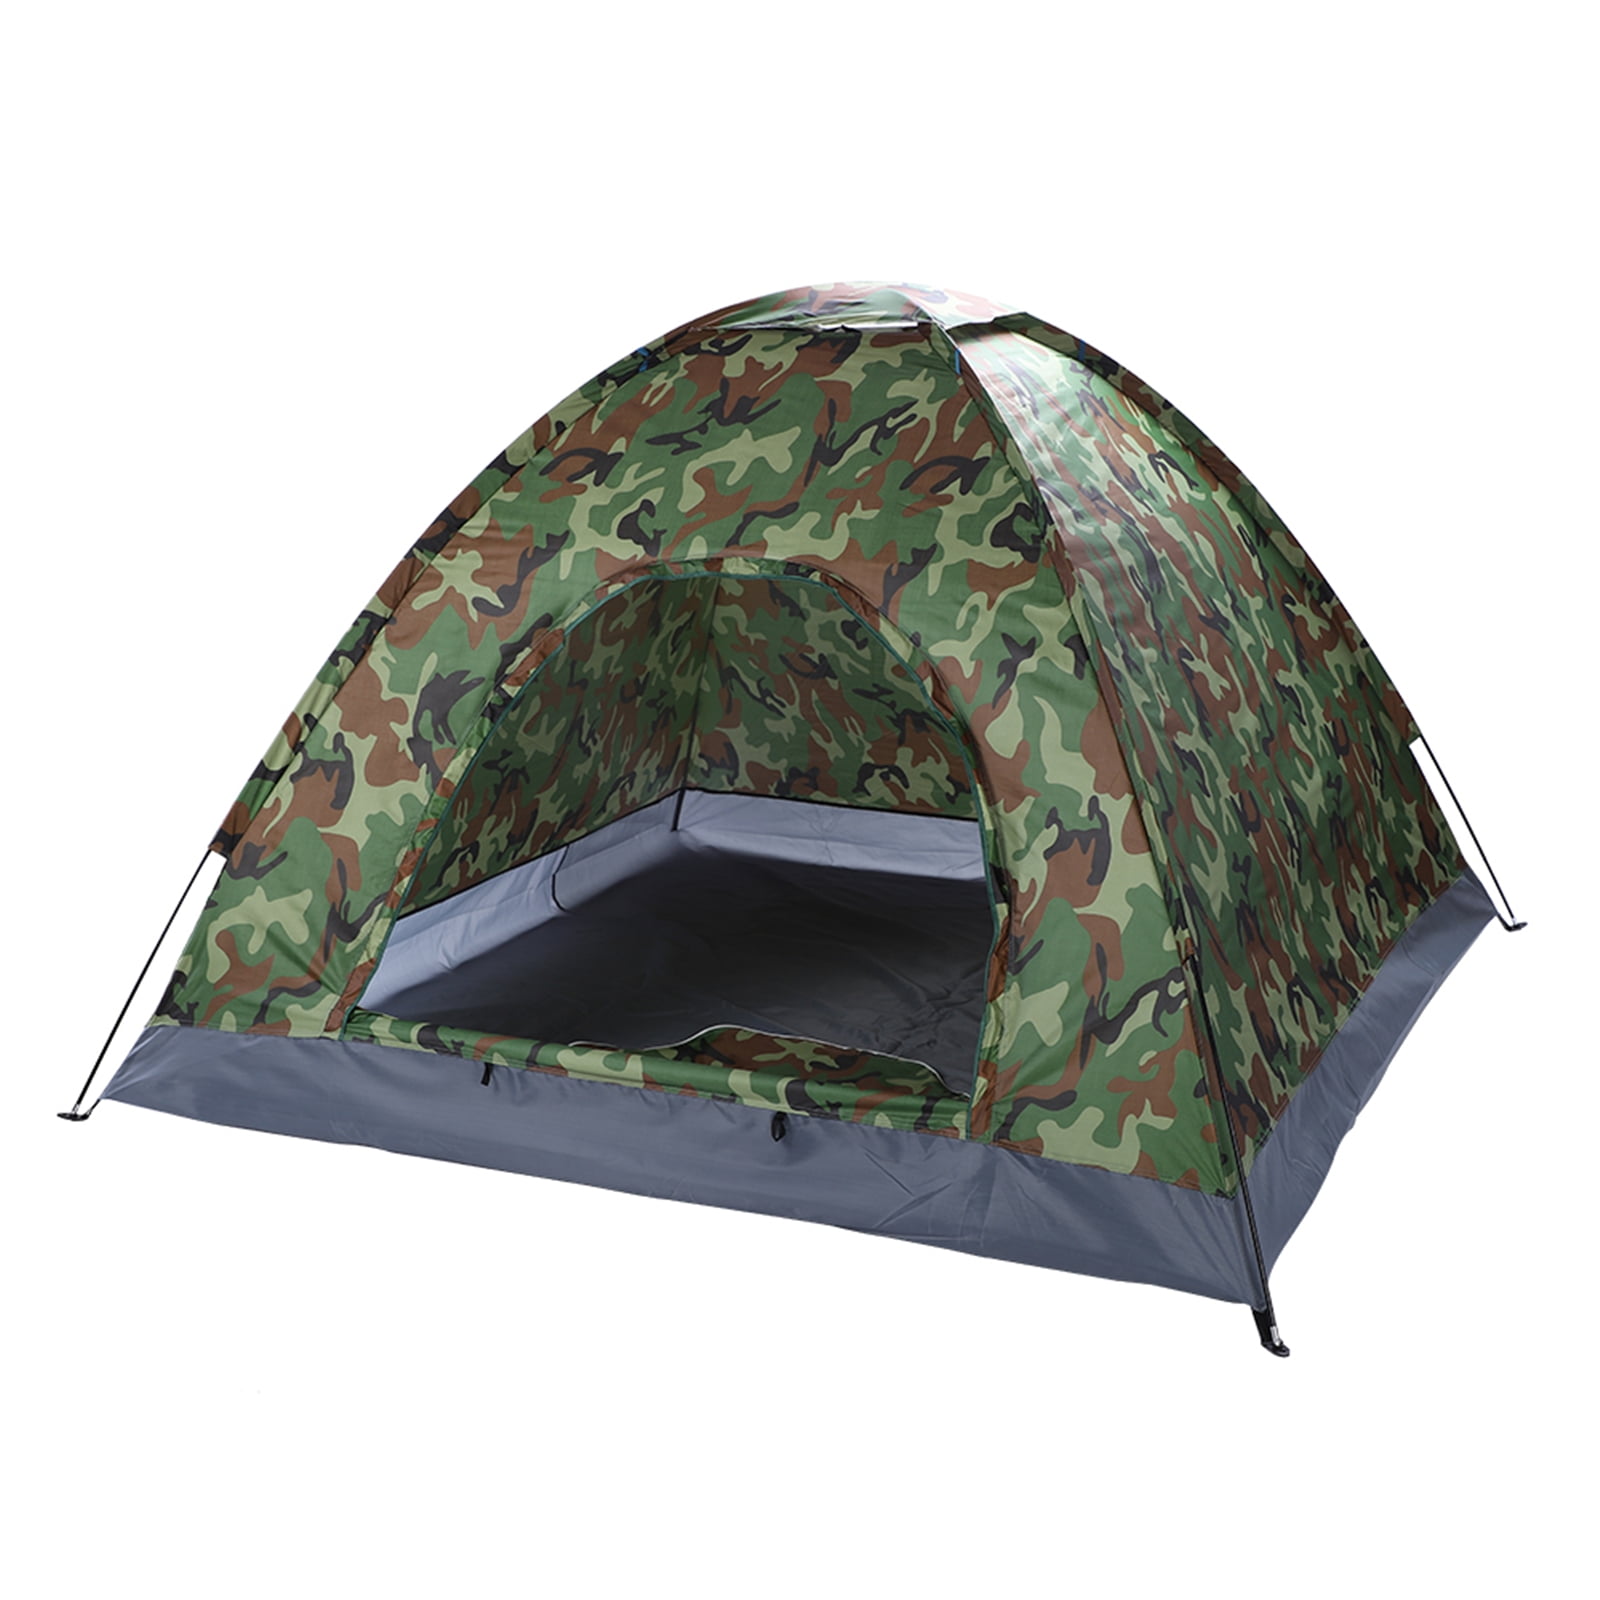 3-4 Man Persons Camouflage Dome Tent Outdoor Hiking Waterproof Camping Fishing 